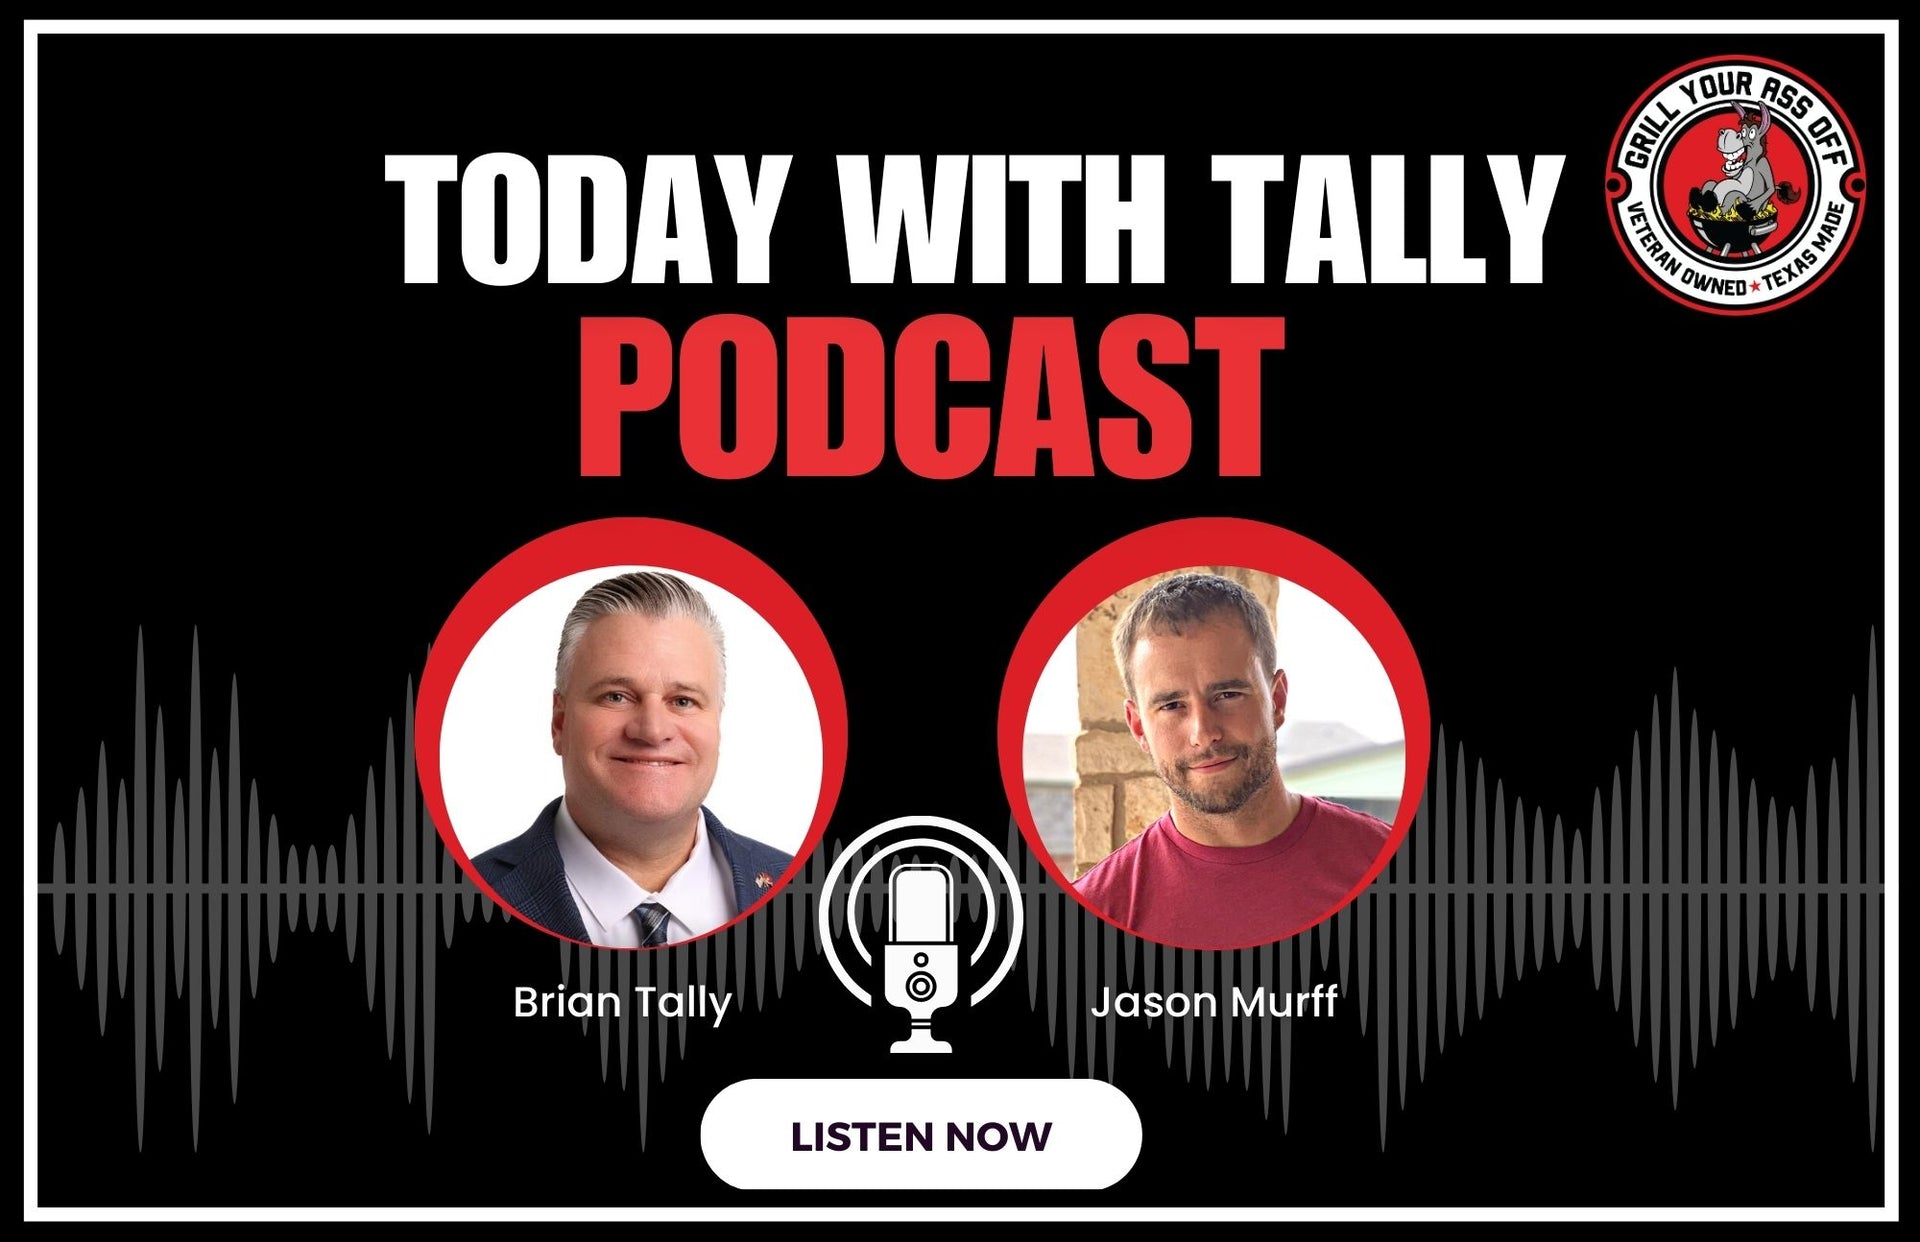 Today with Tally Podcast